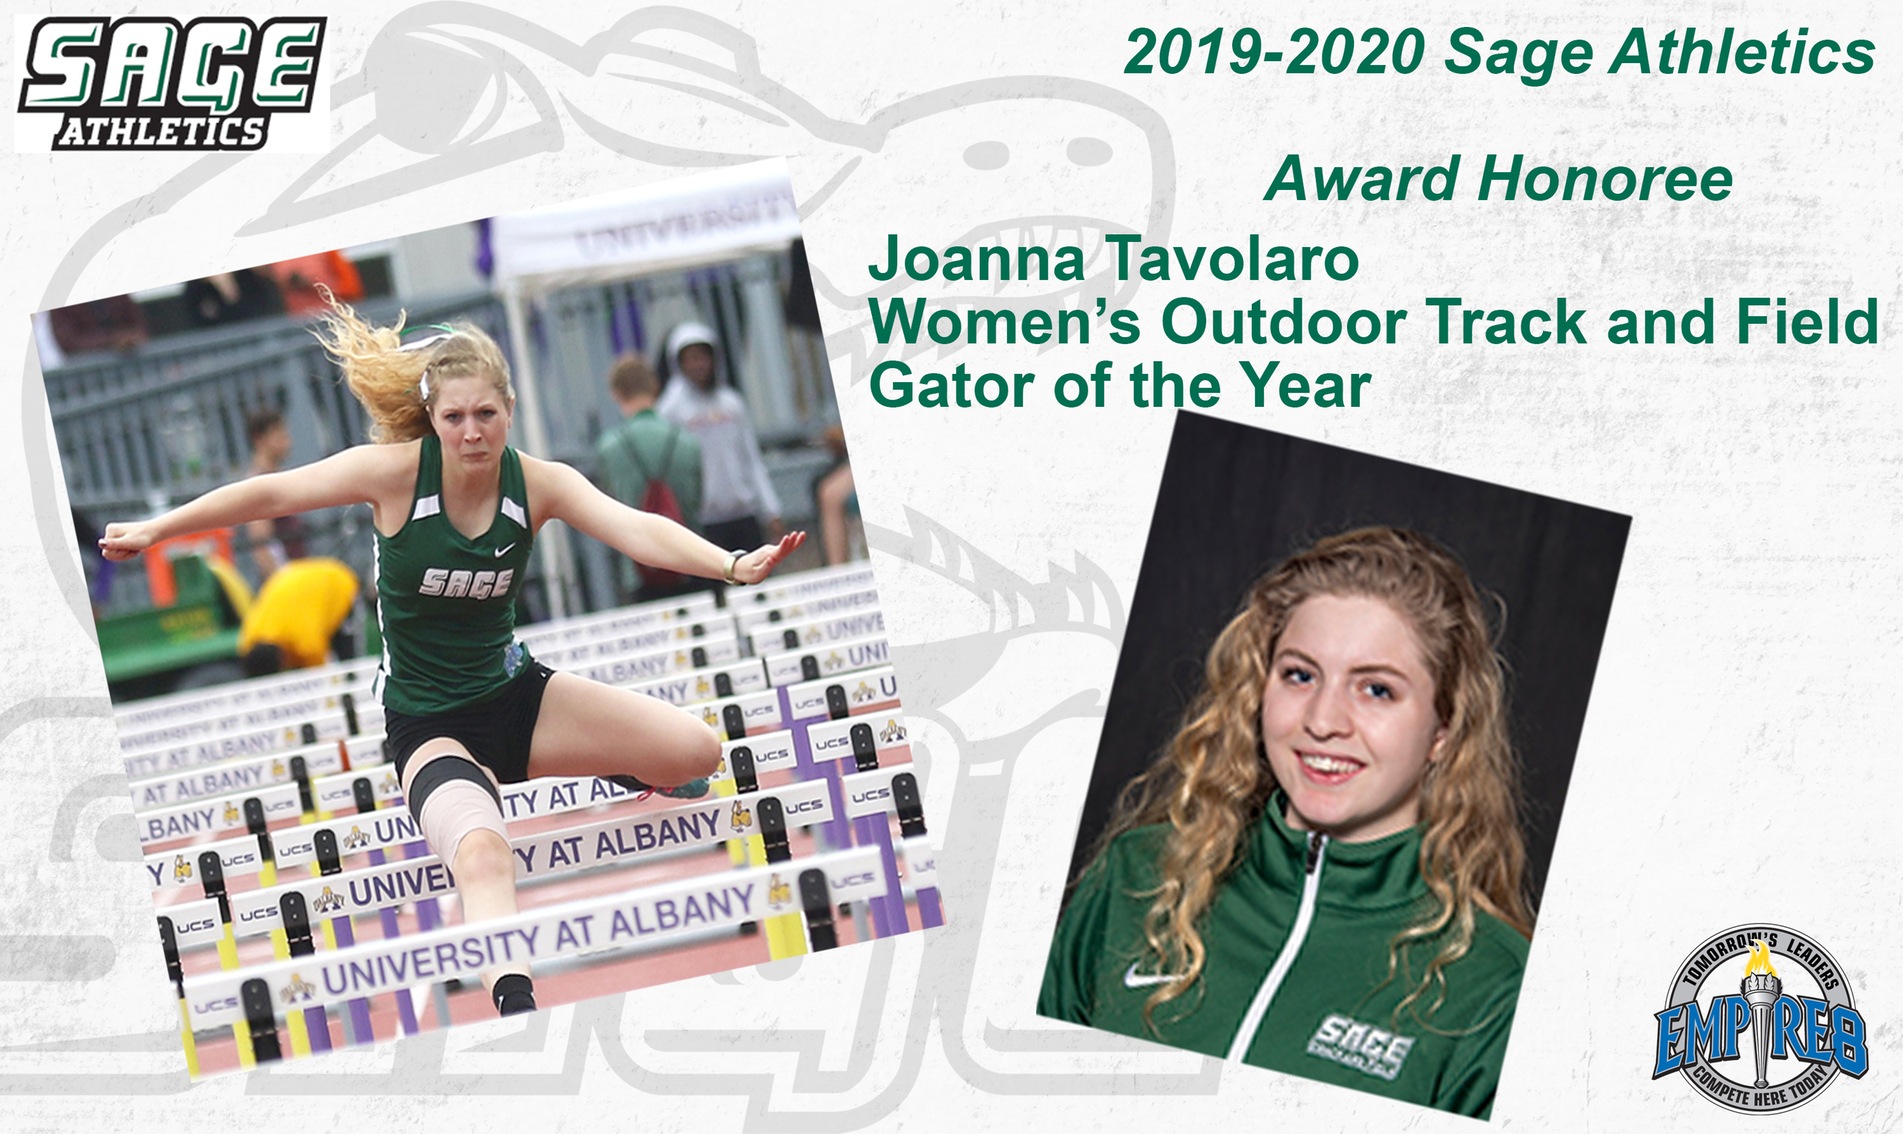 Joanna Tavolaro tapped as women's track and field Gator of the Year